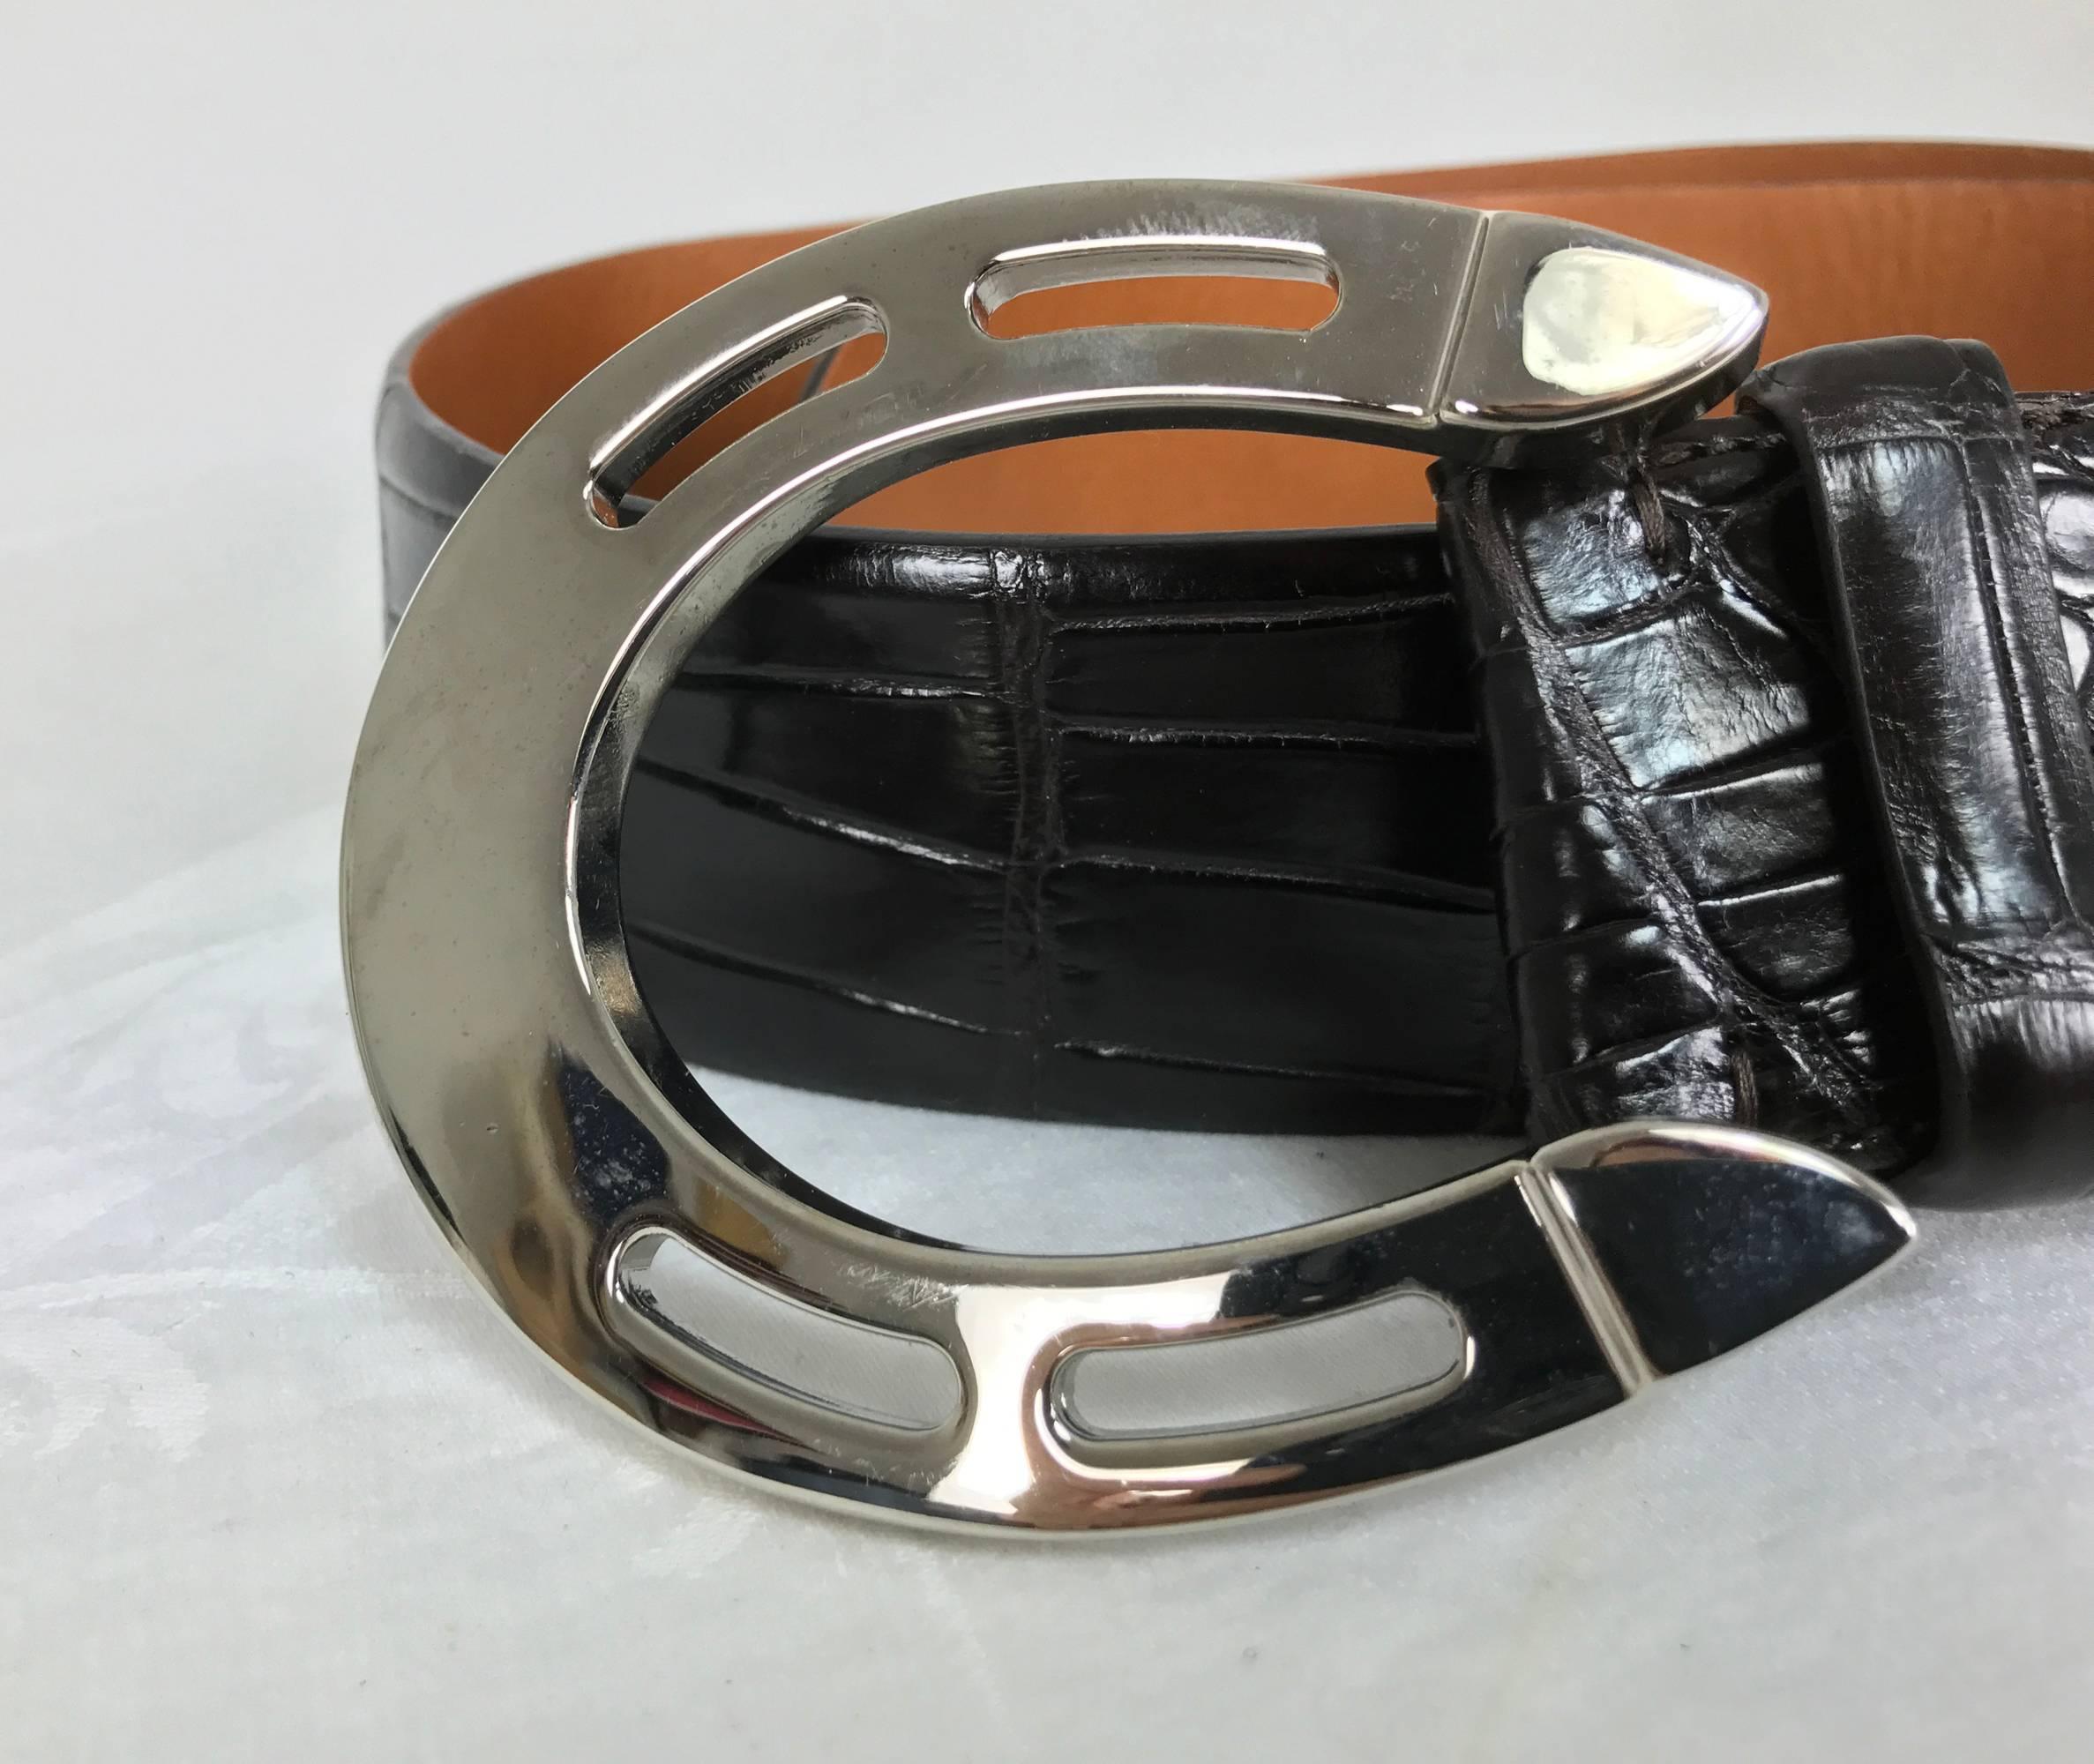 Fabulous Ralph Lauren dark chocolate brown alligator belt with a large heavy silver horseshoe buckle...Marked size Large...In excellent condition looks unworn.
Measurements are:
1 5/8" wide
40 1/2" long end to end belt only add 3 3/4"